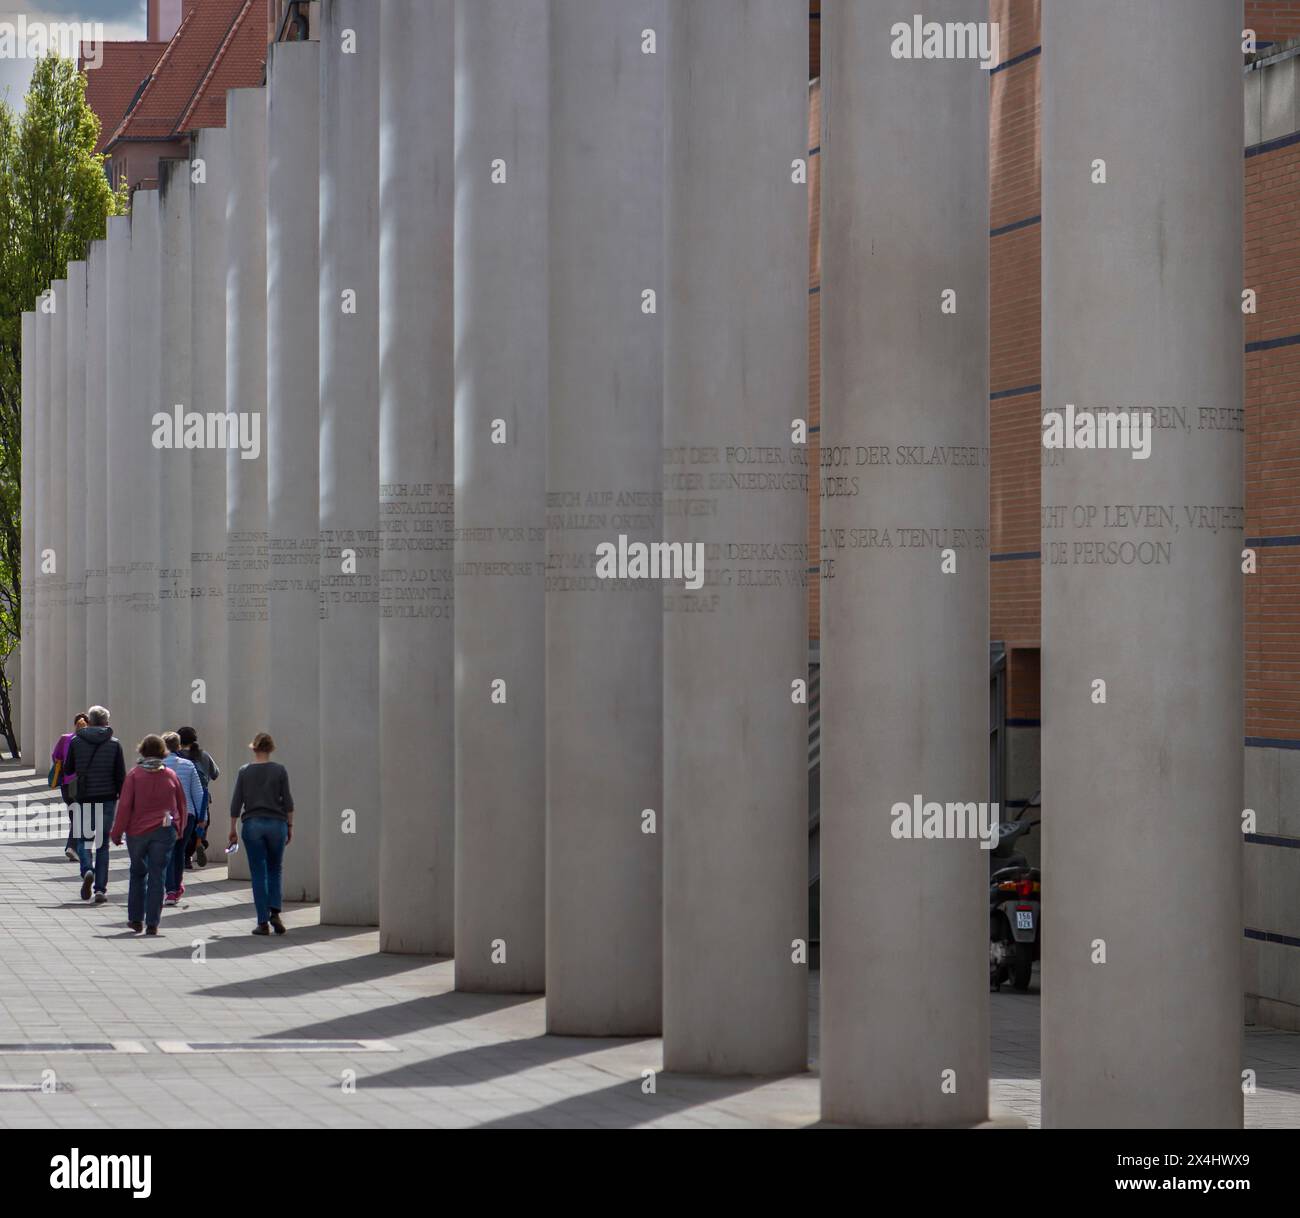 The Street of Human Rights, a memorial in the city centre of Nuremberg, created by the Israeli artist Dani Karavan, opened in 1993, Kartaeusergasse Stock Photo